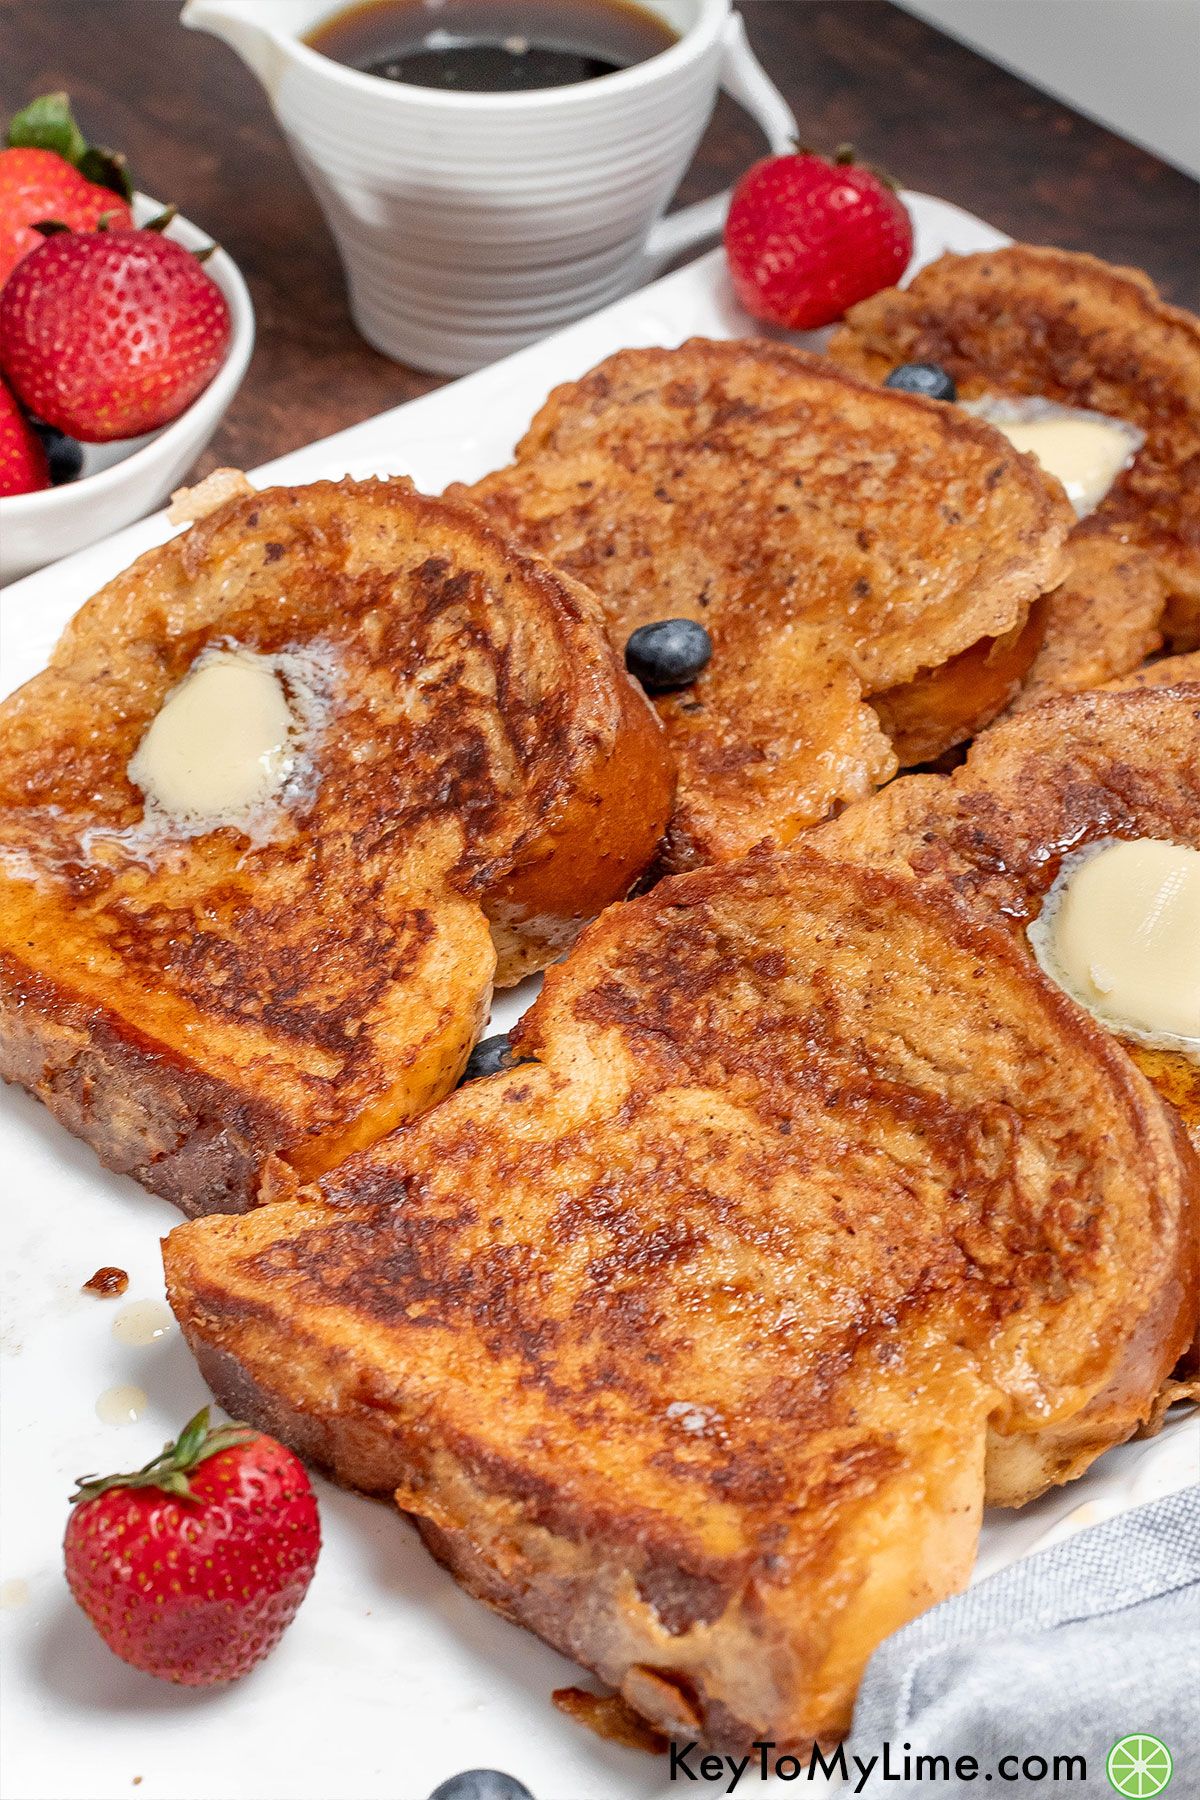 A side image of multiple slices of freshly made French toast garnished with strawberries on a white plate.